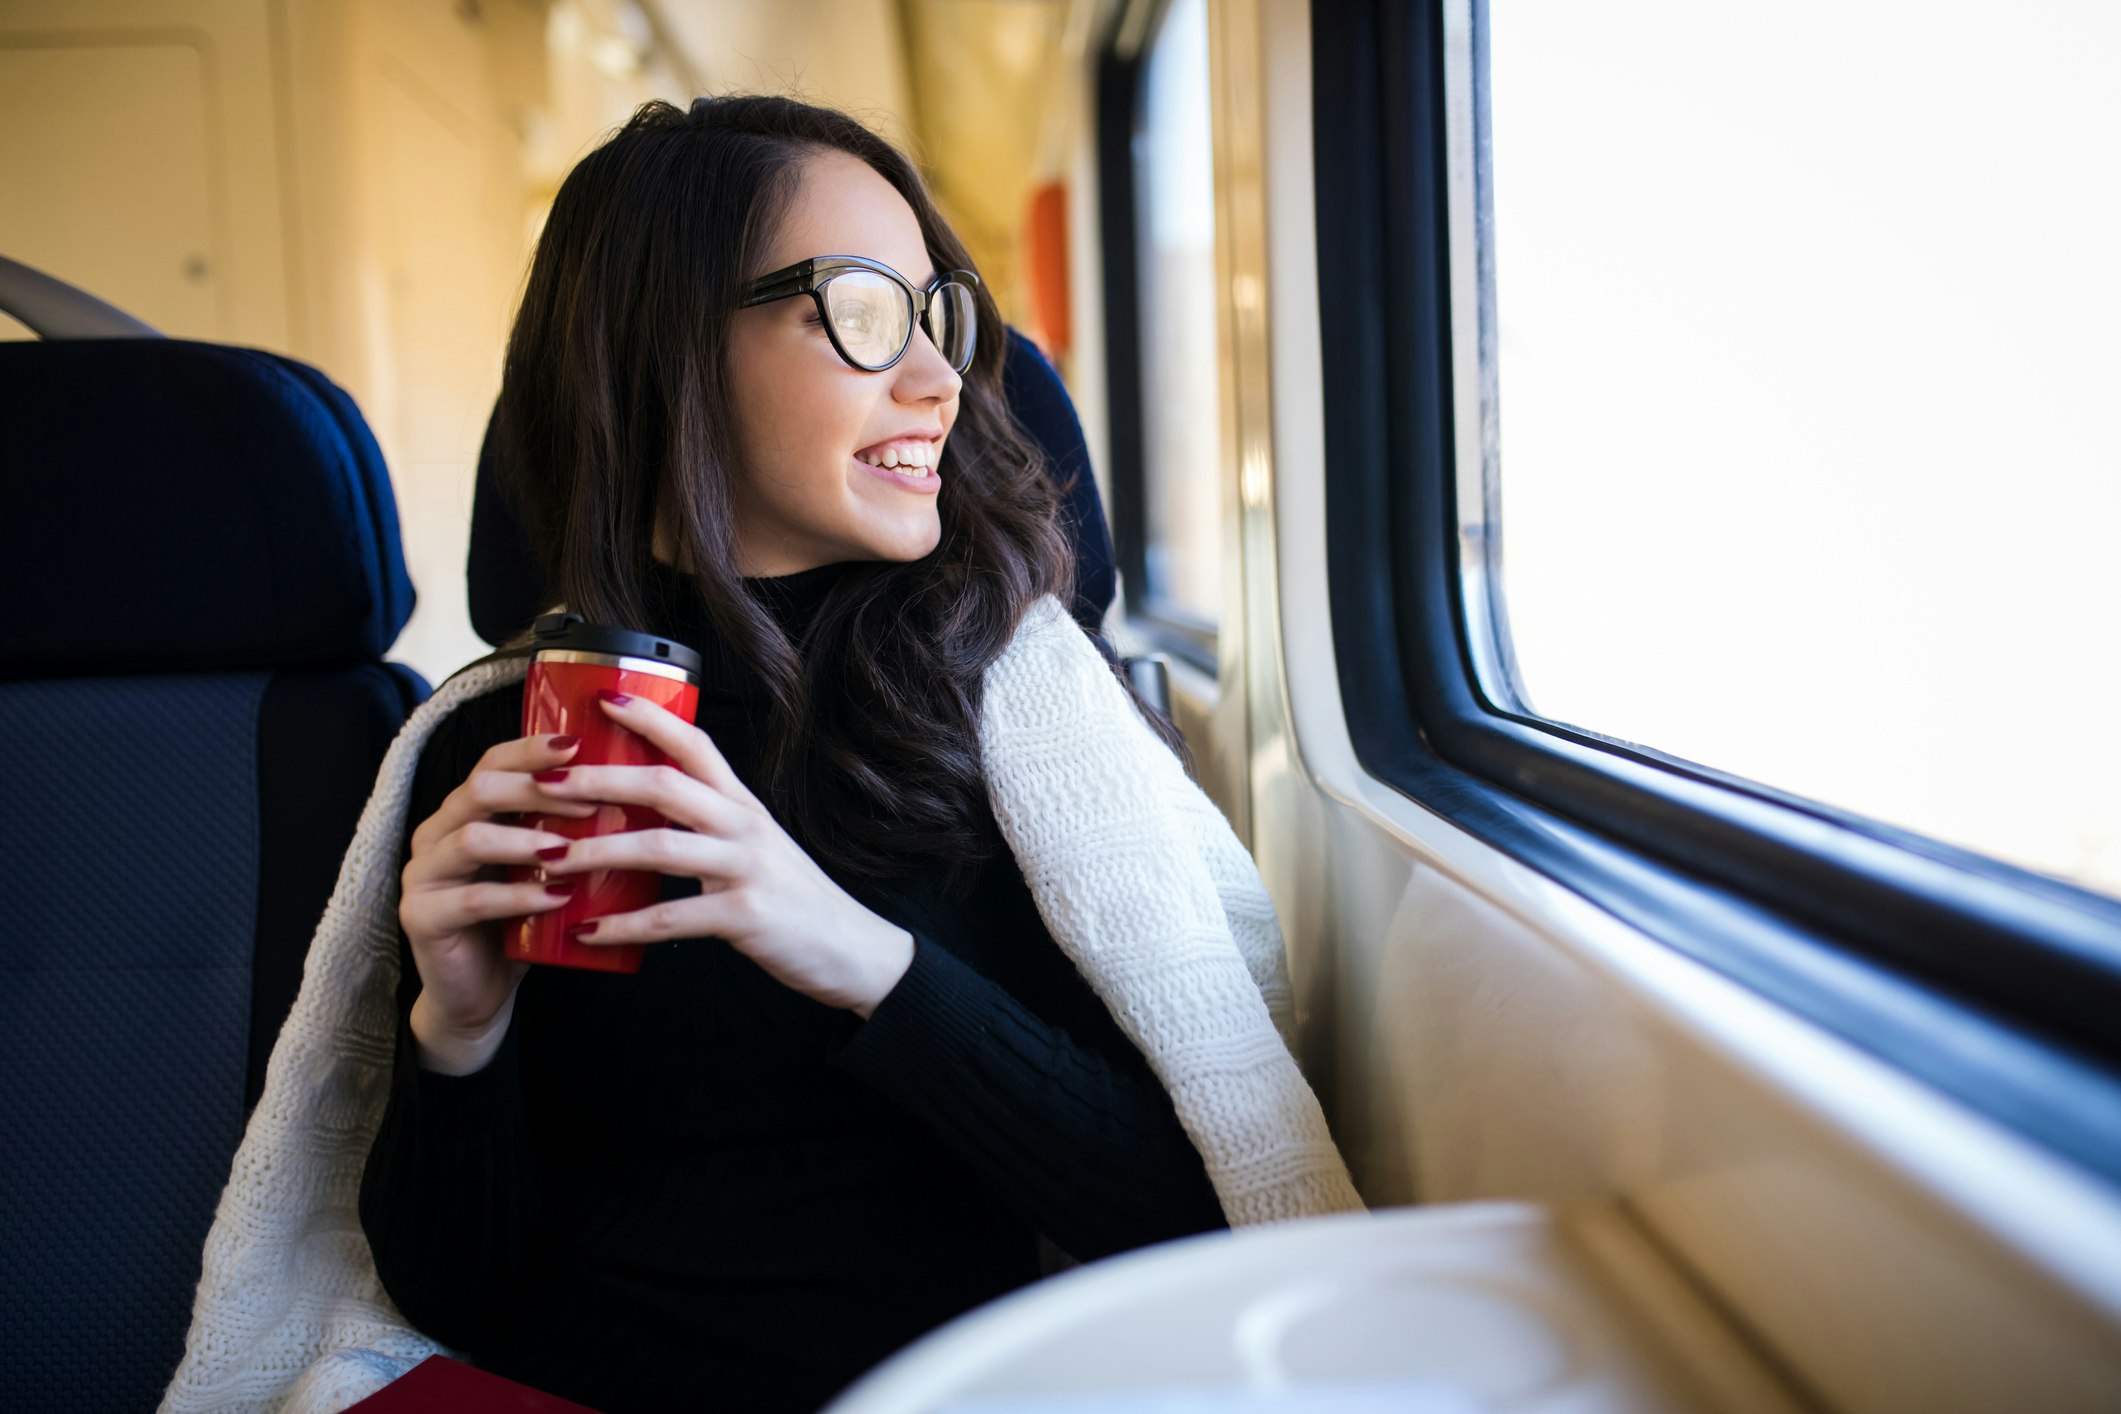 Young woman holding a coffee cup and looking out a train window